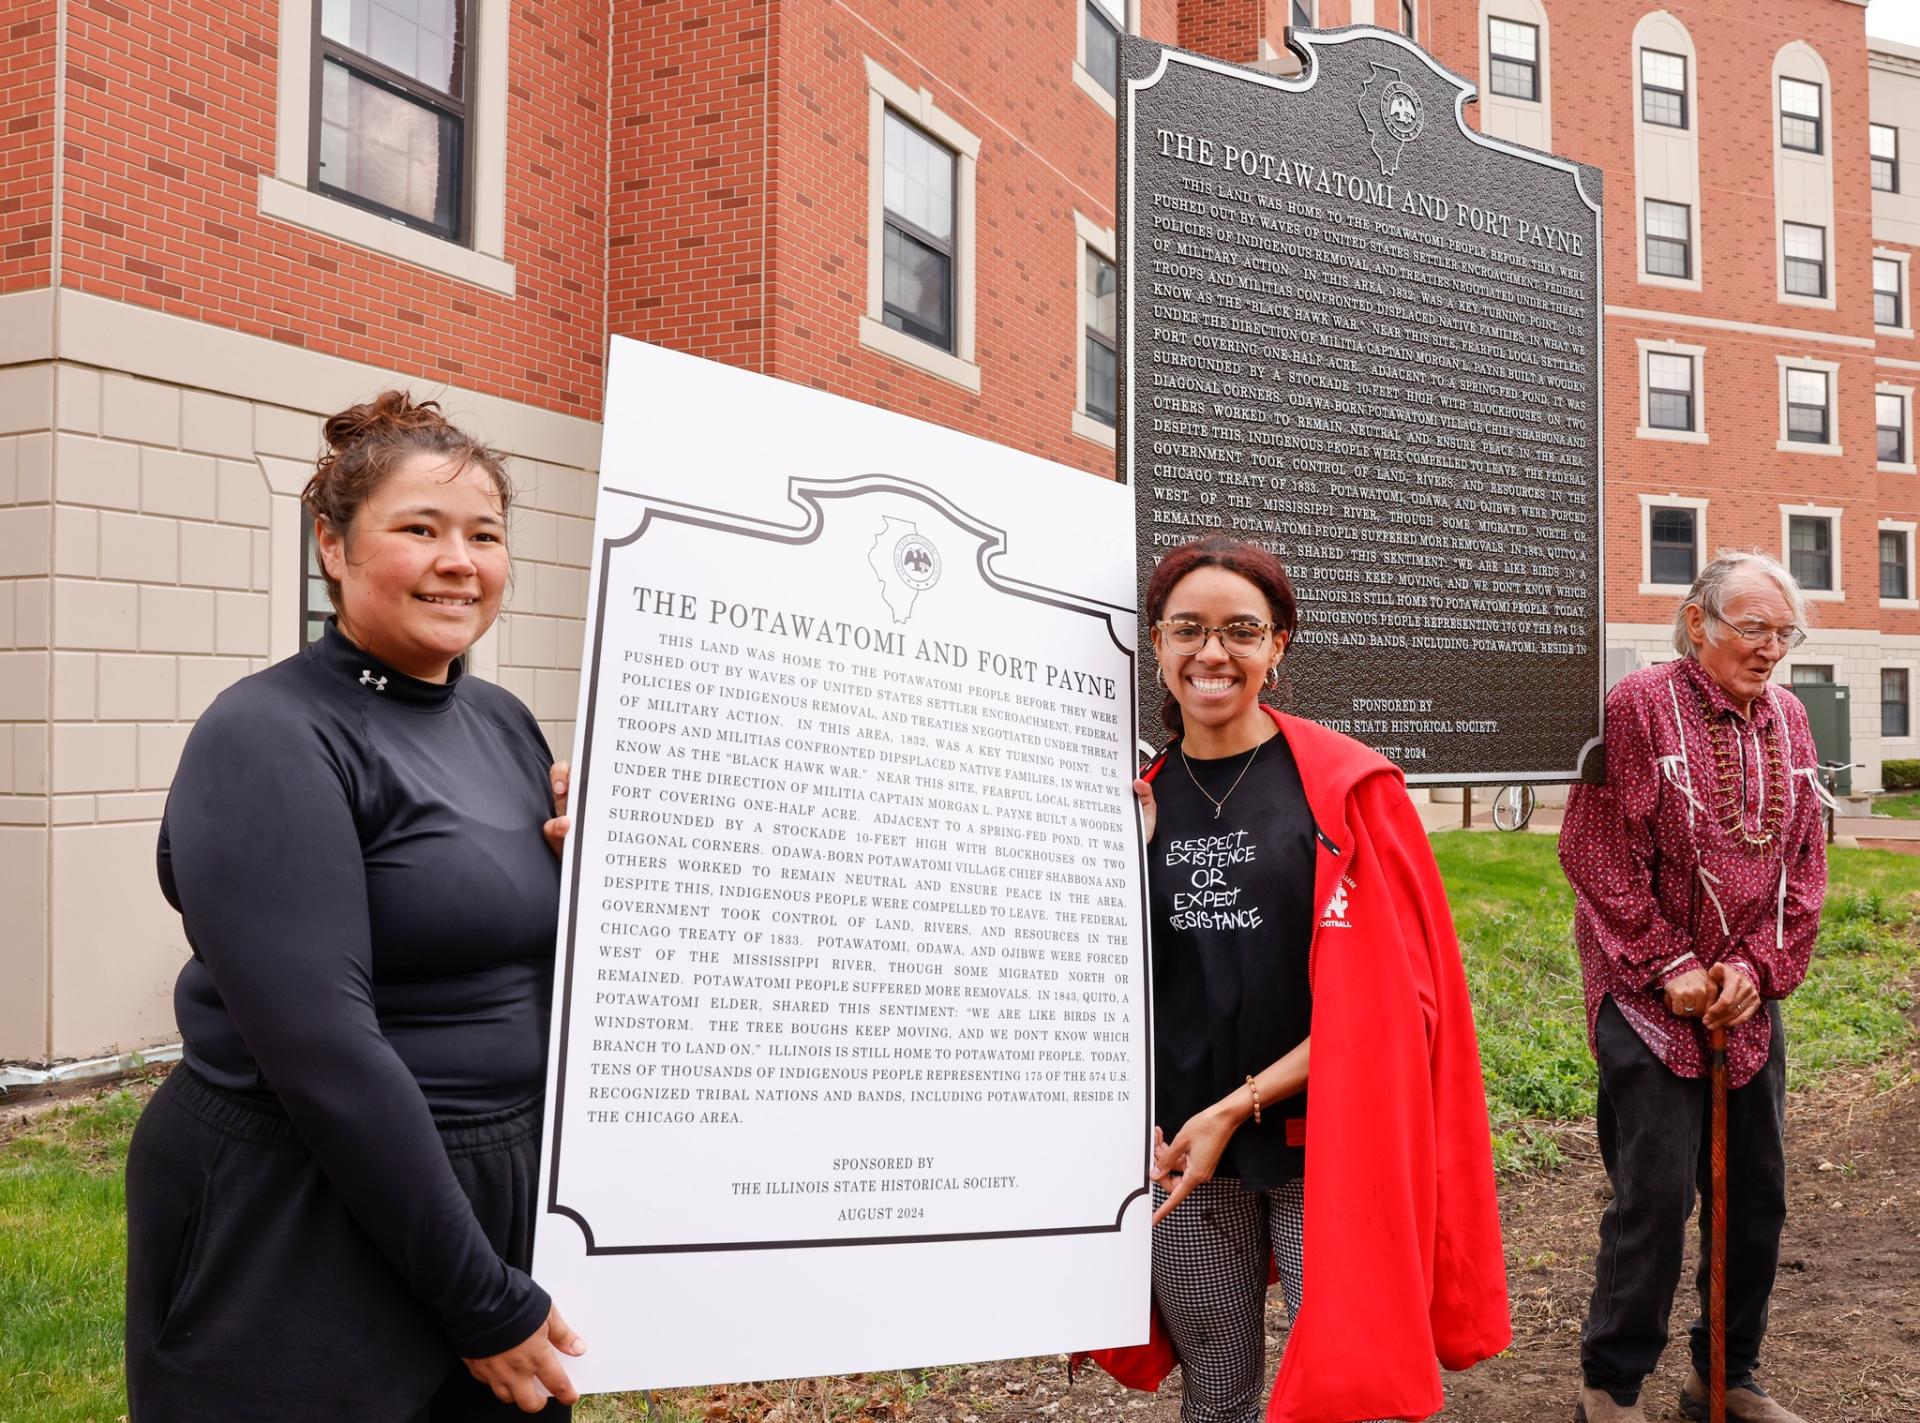 Raygn Jordan with a replica of the historical marker.